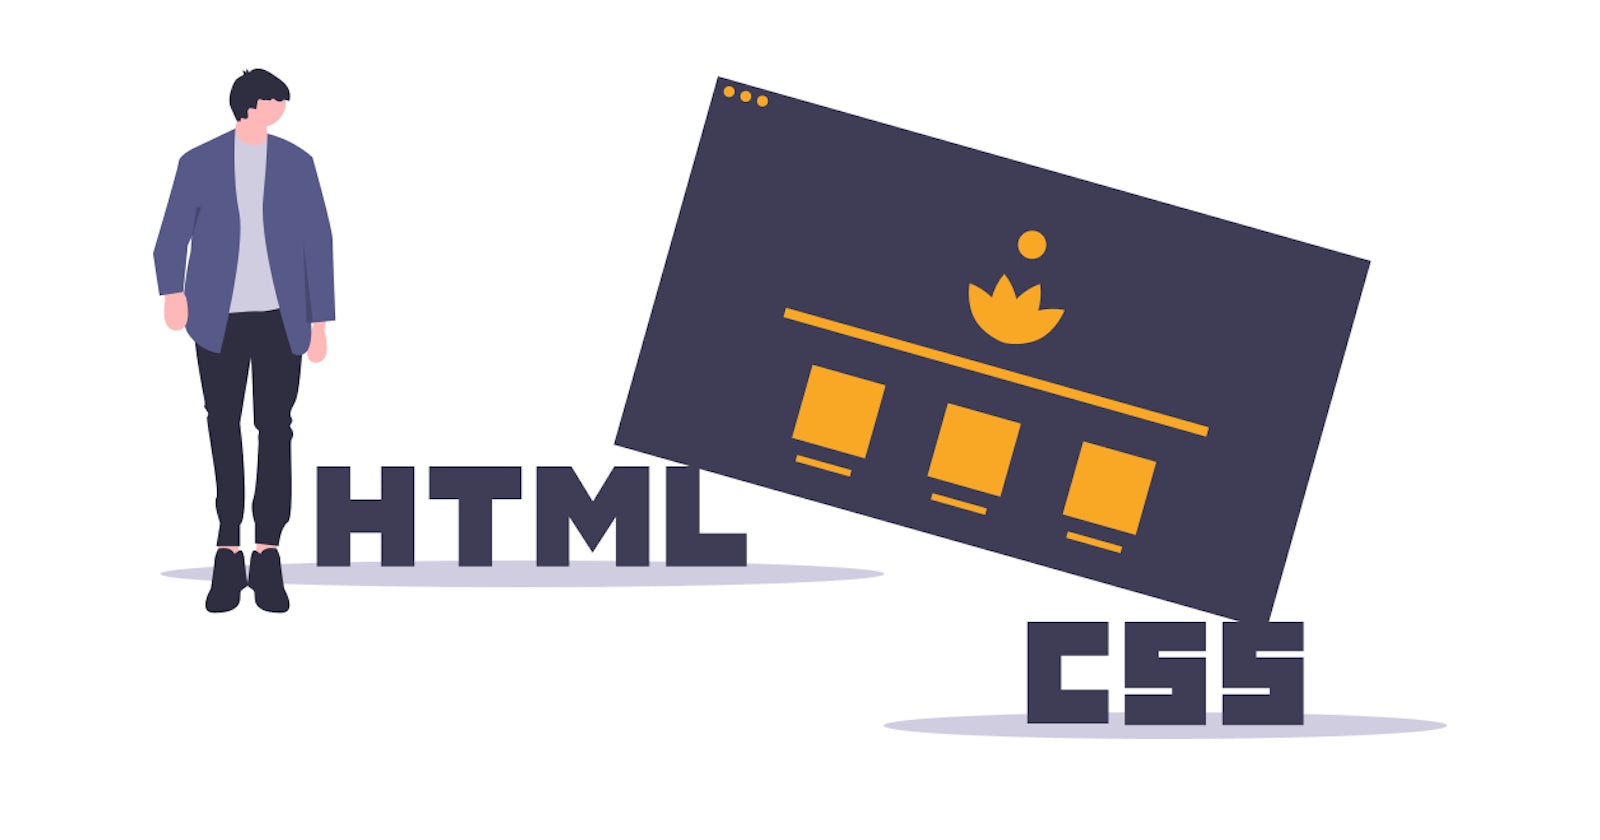 You want to learn HTML & CSS but don't know where to get started?